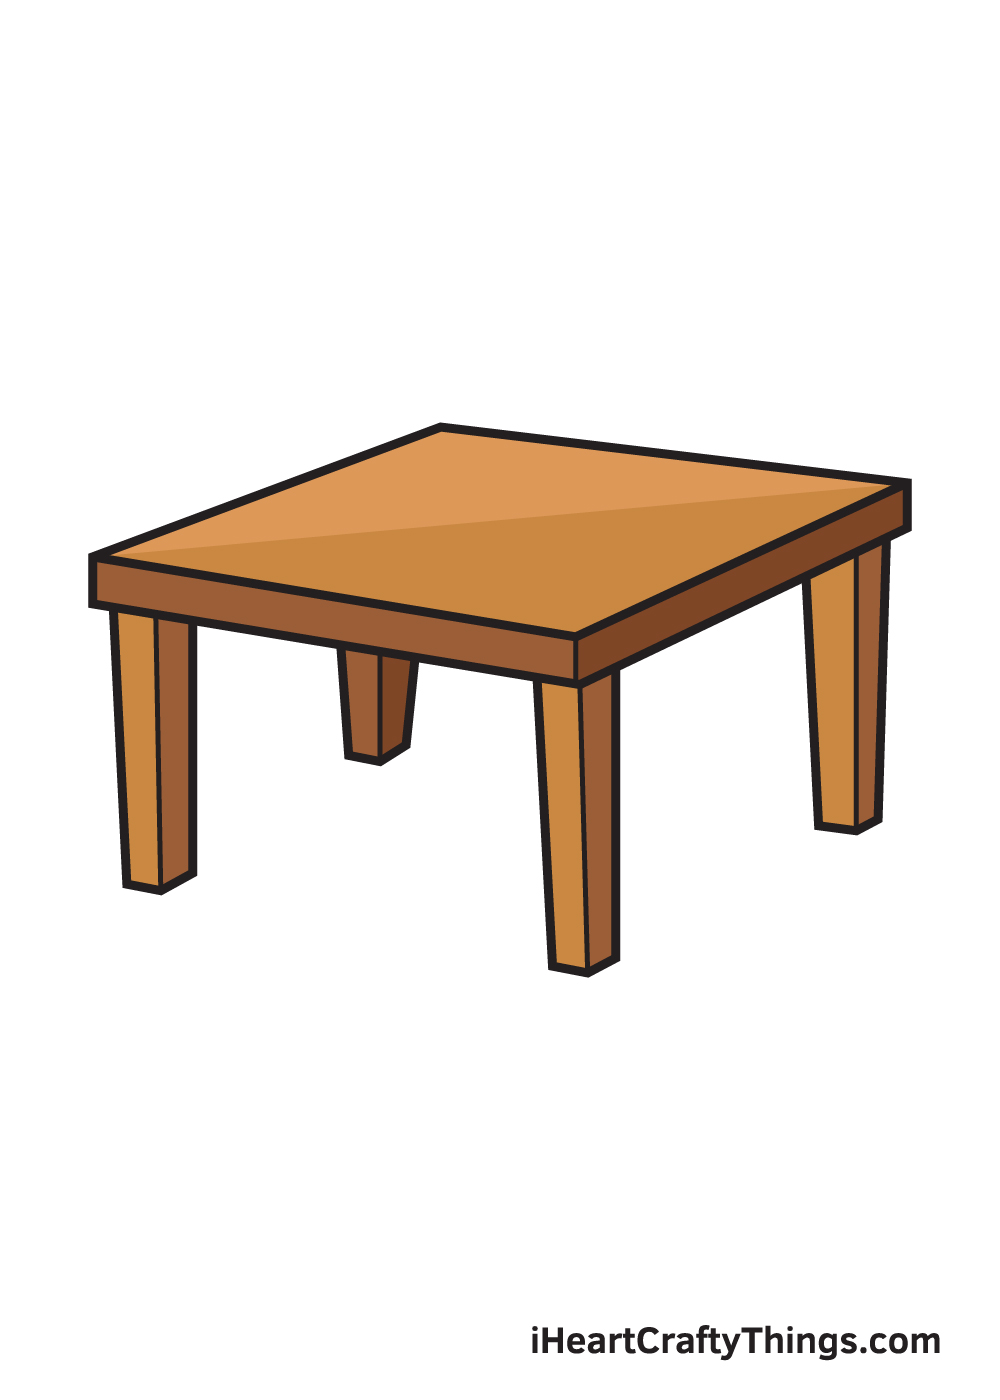 Table Drawing - How To Draw A Table Step By Step